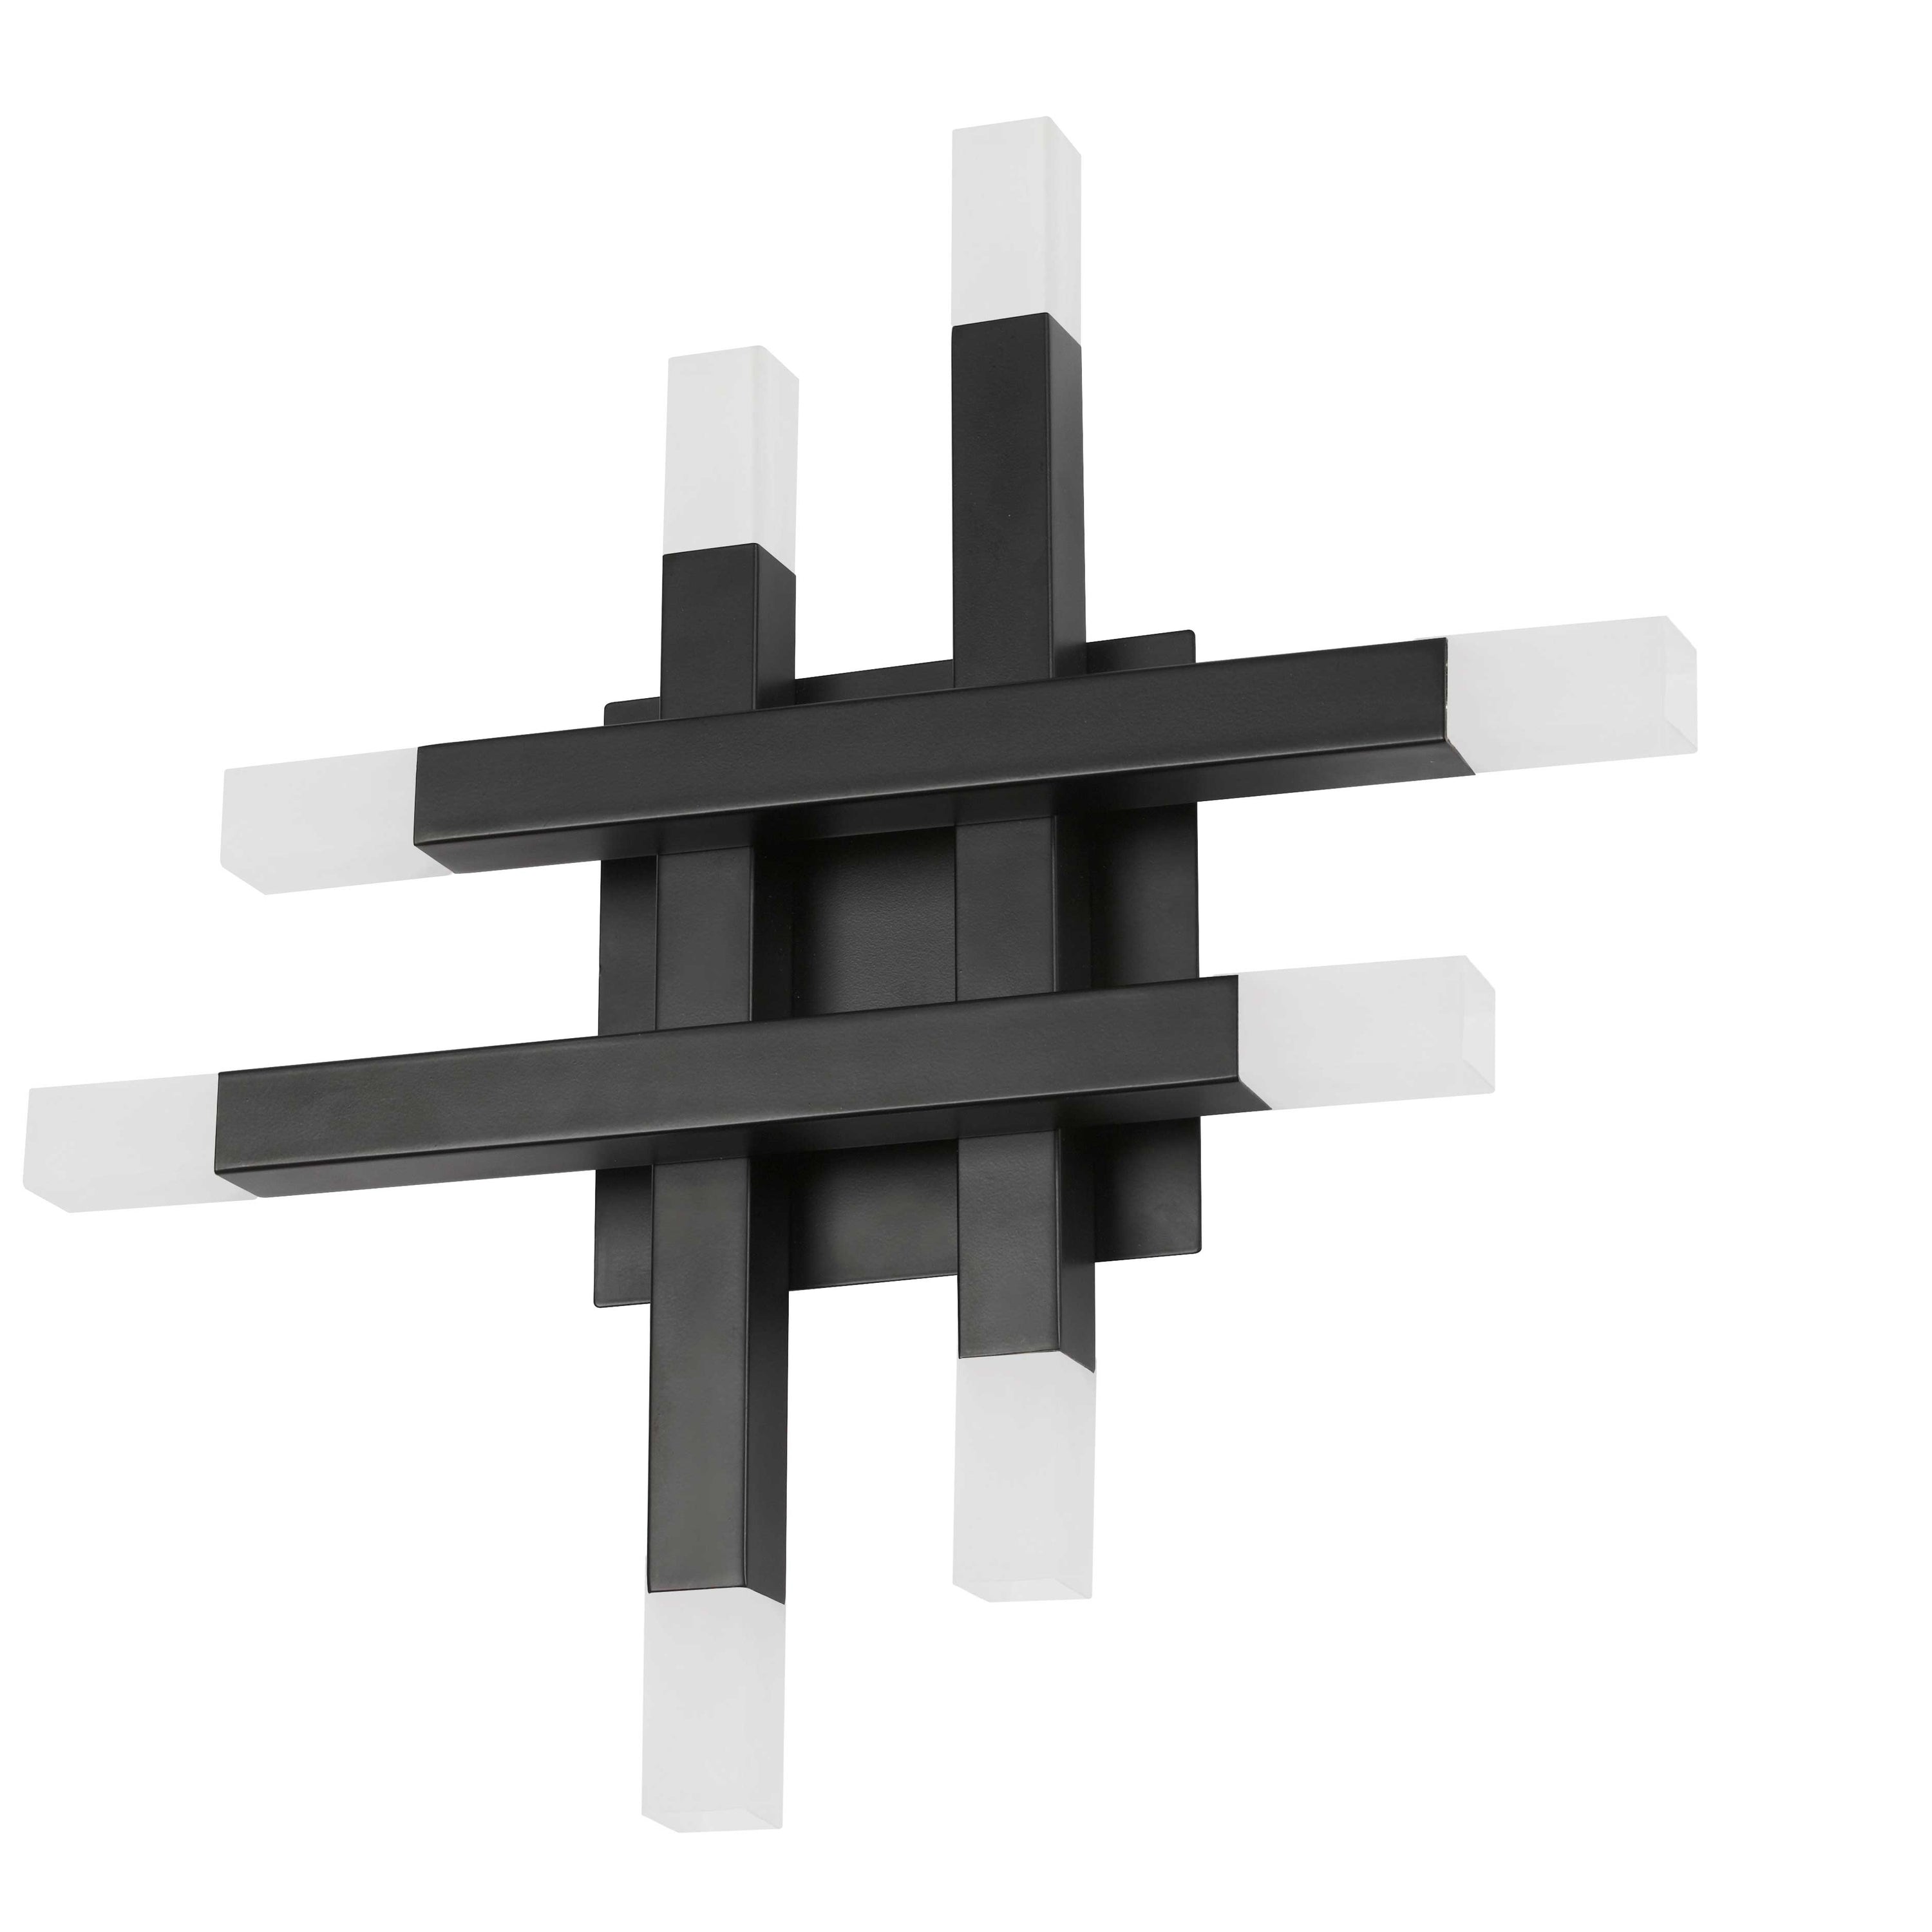 Dainolite Acasia - ACS-1432W-MB-FR - 24W Wall Sconce Matte Black with Frosted Acrylic Diffuser - Matte Black